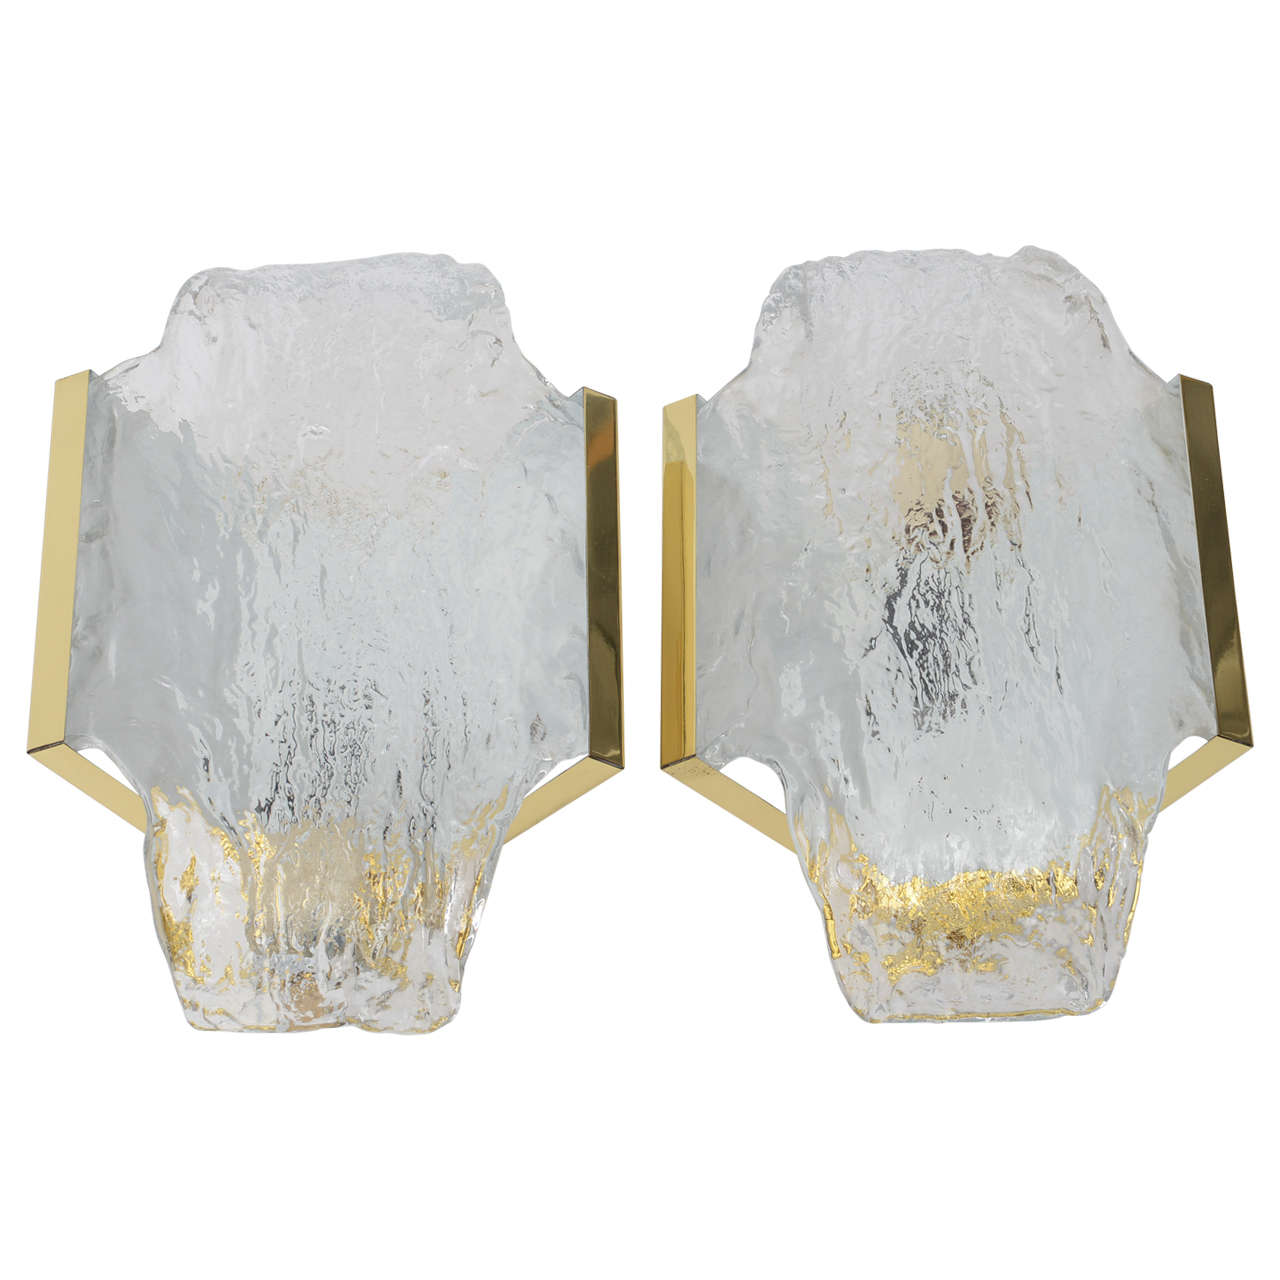 Pair of 1960s Italian Brass and Murano Glass Wall Sconces by Mazzega